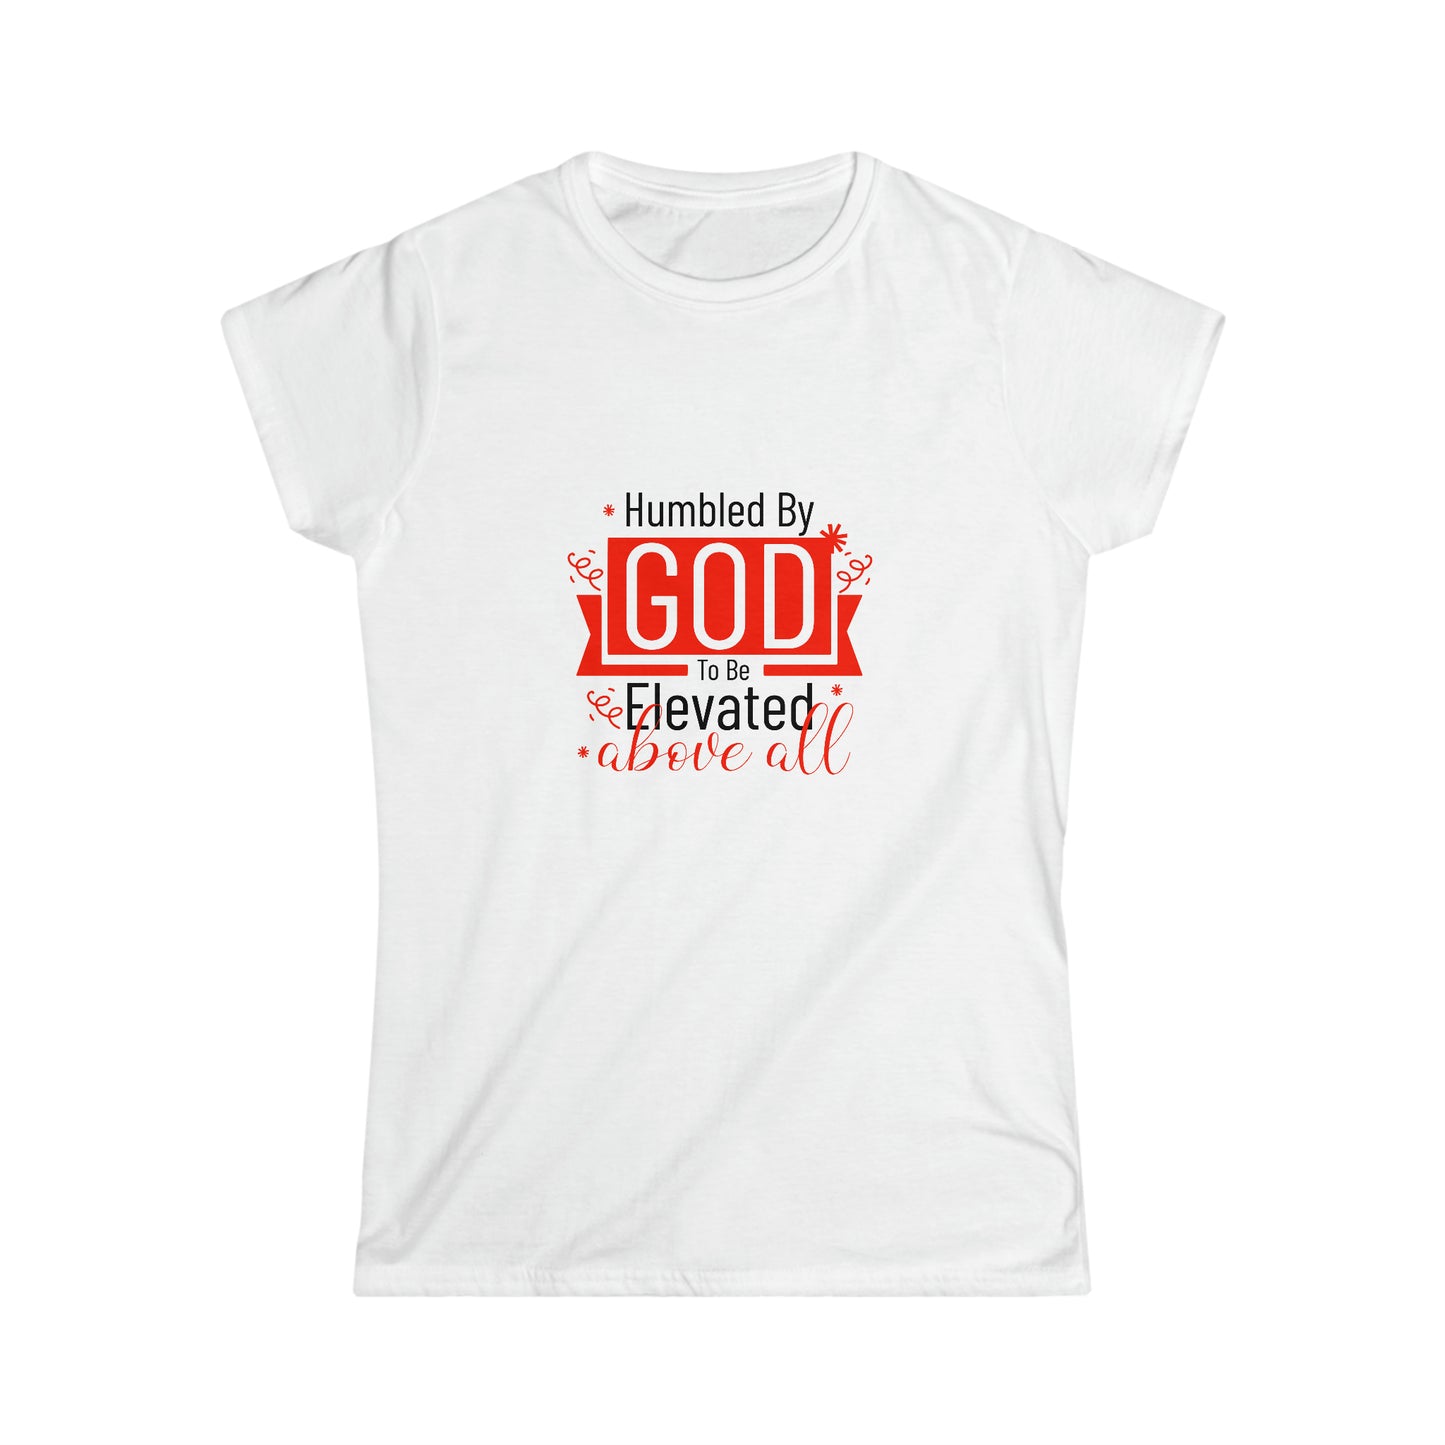 Humbled by God To Be Elevated Above All Women's T-shirt